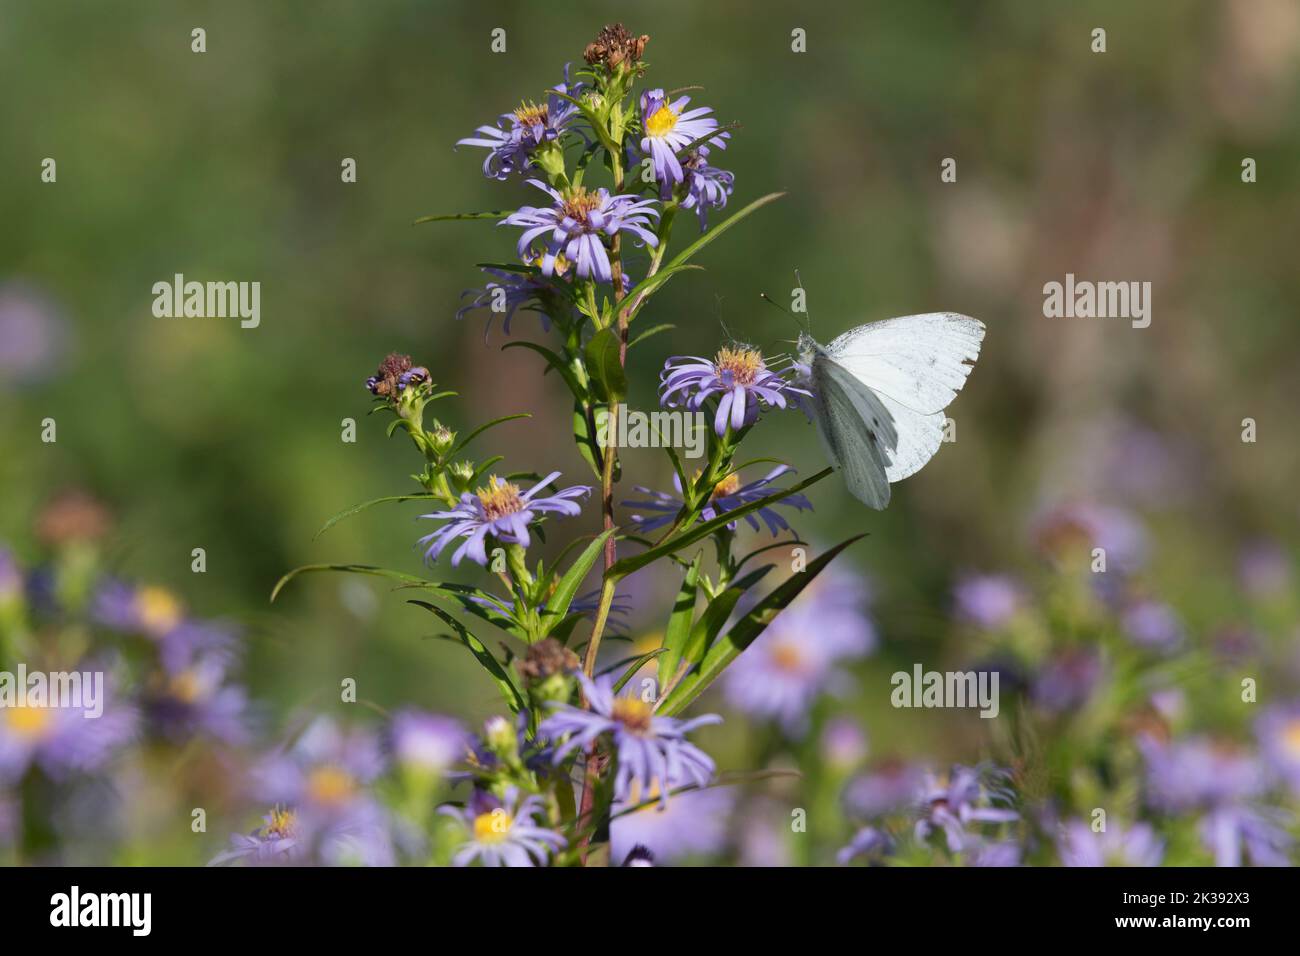 A Small White Butterfly (Pieris Rapae) Feeding On Michaelmas Daisies (Symphyotrichum Novi-Belgii) in Late Summer / Early Autumn Stock Photo